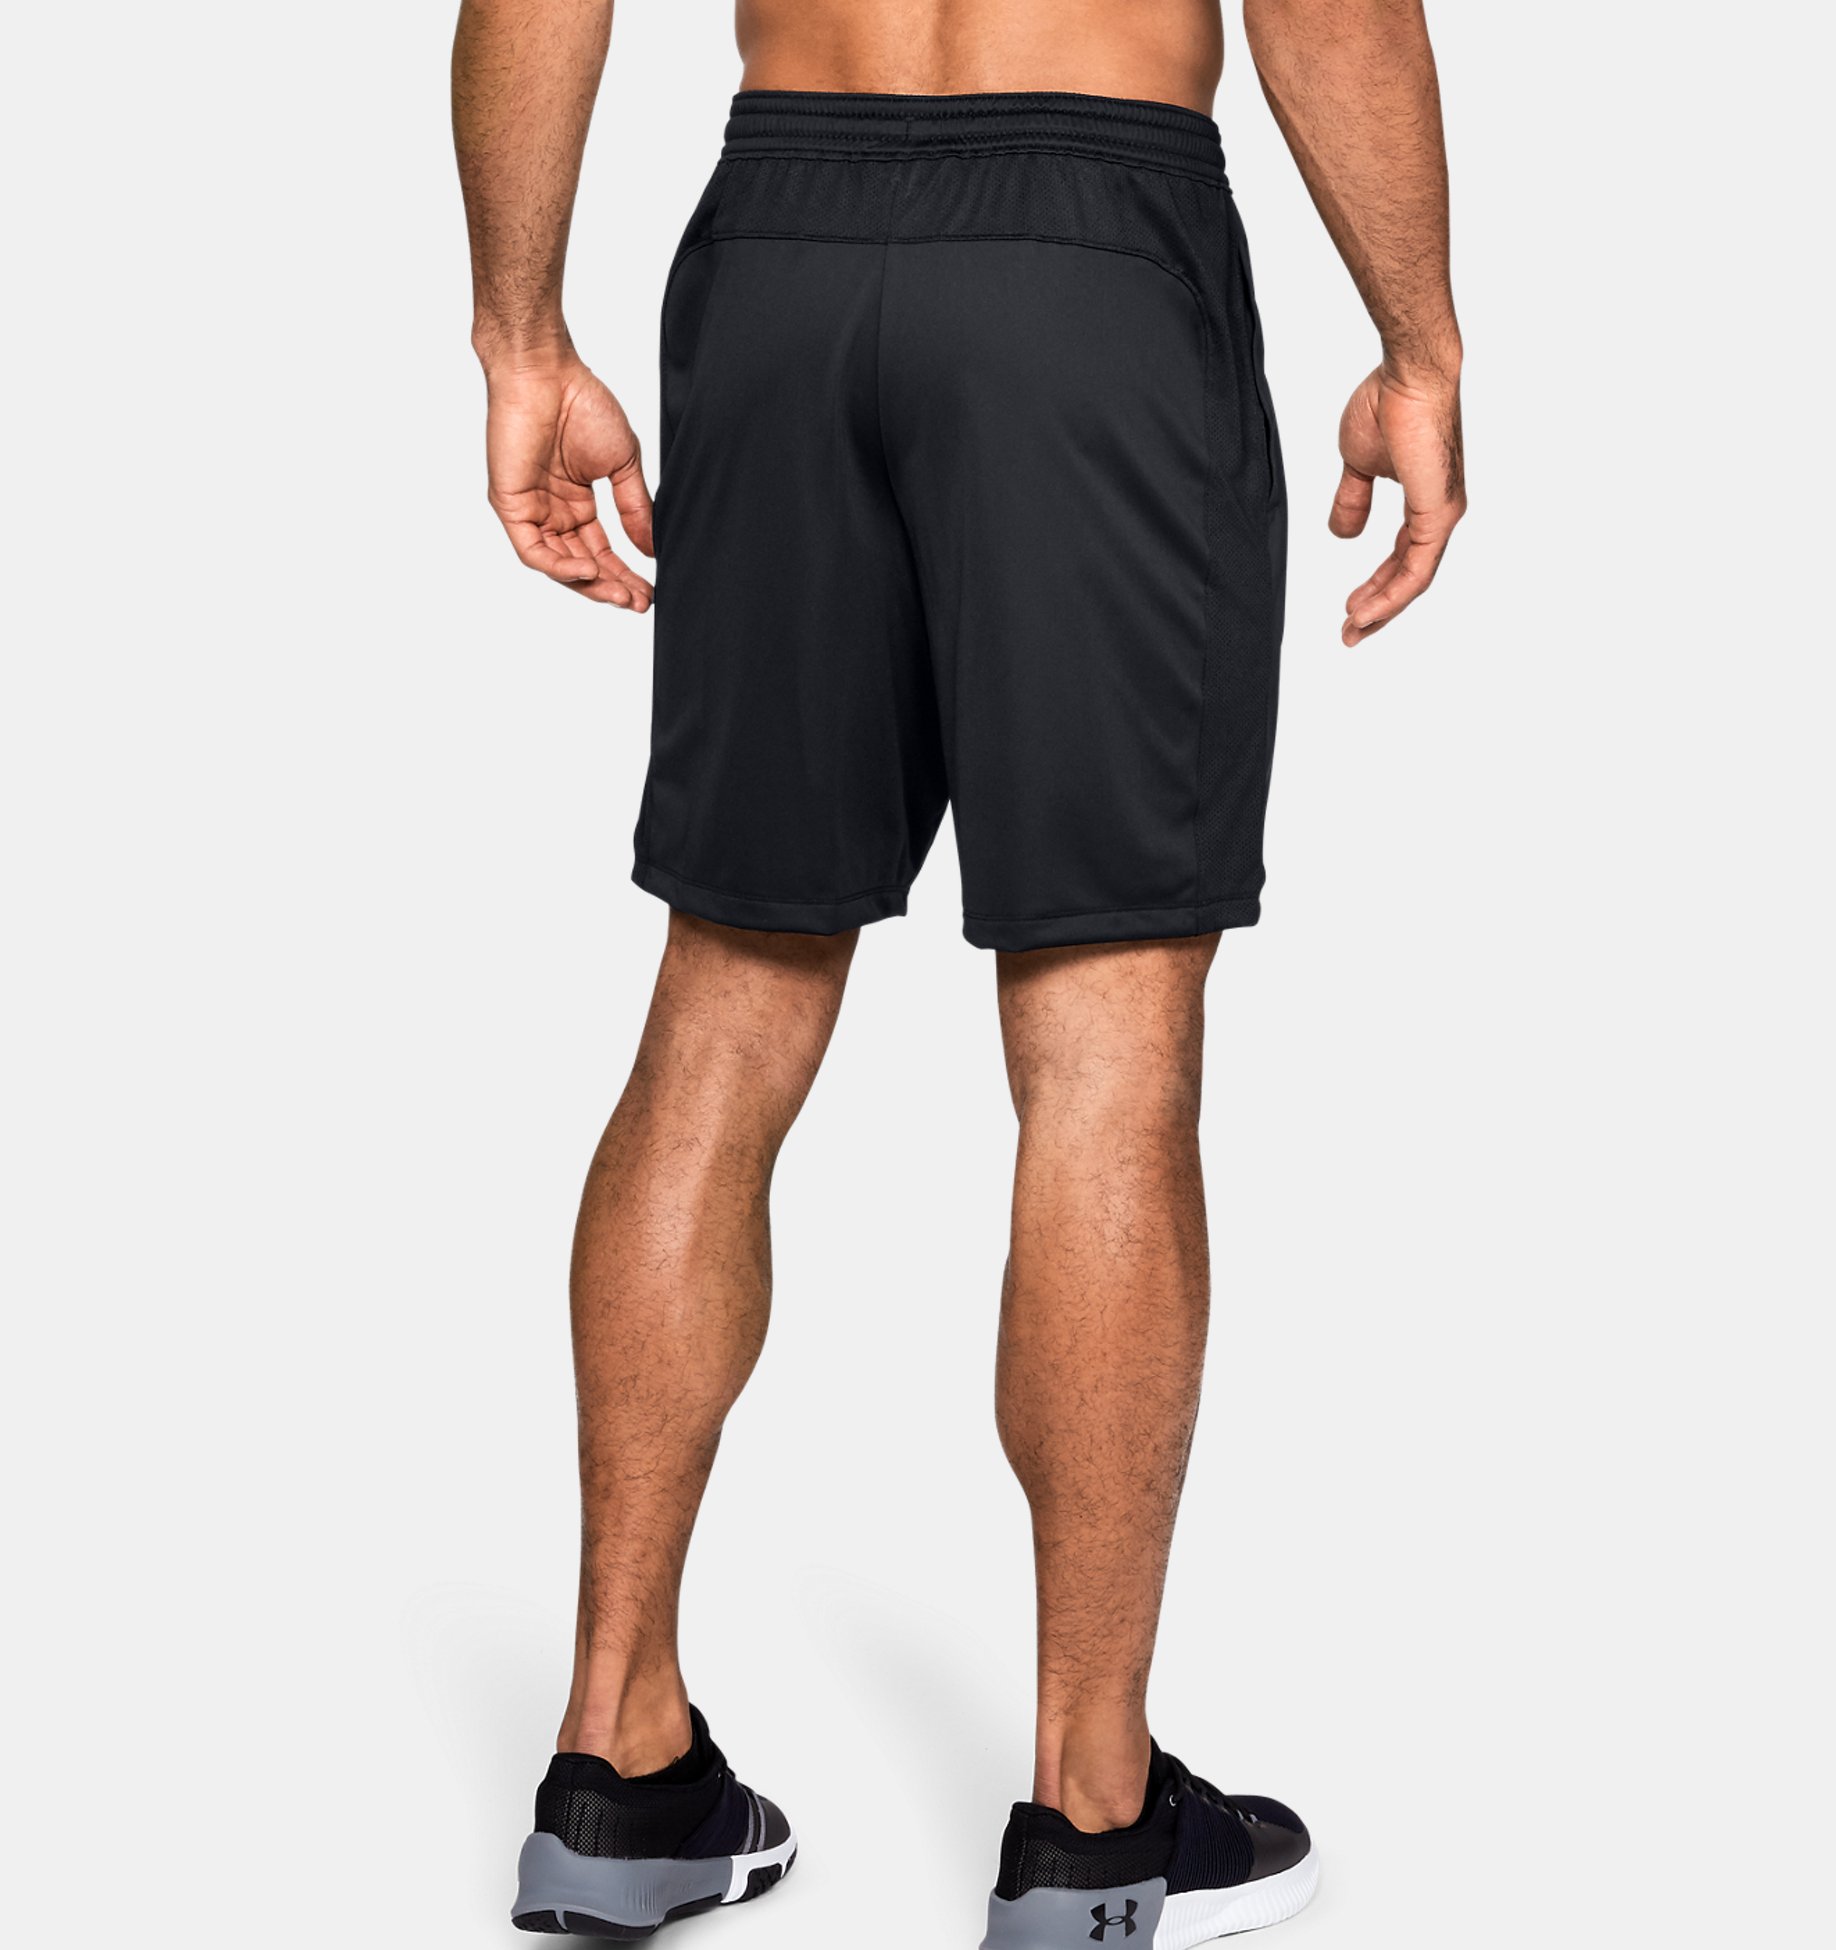 Under Armour Mens MK1 Workout Training Shorts